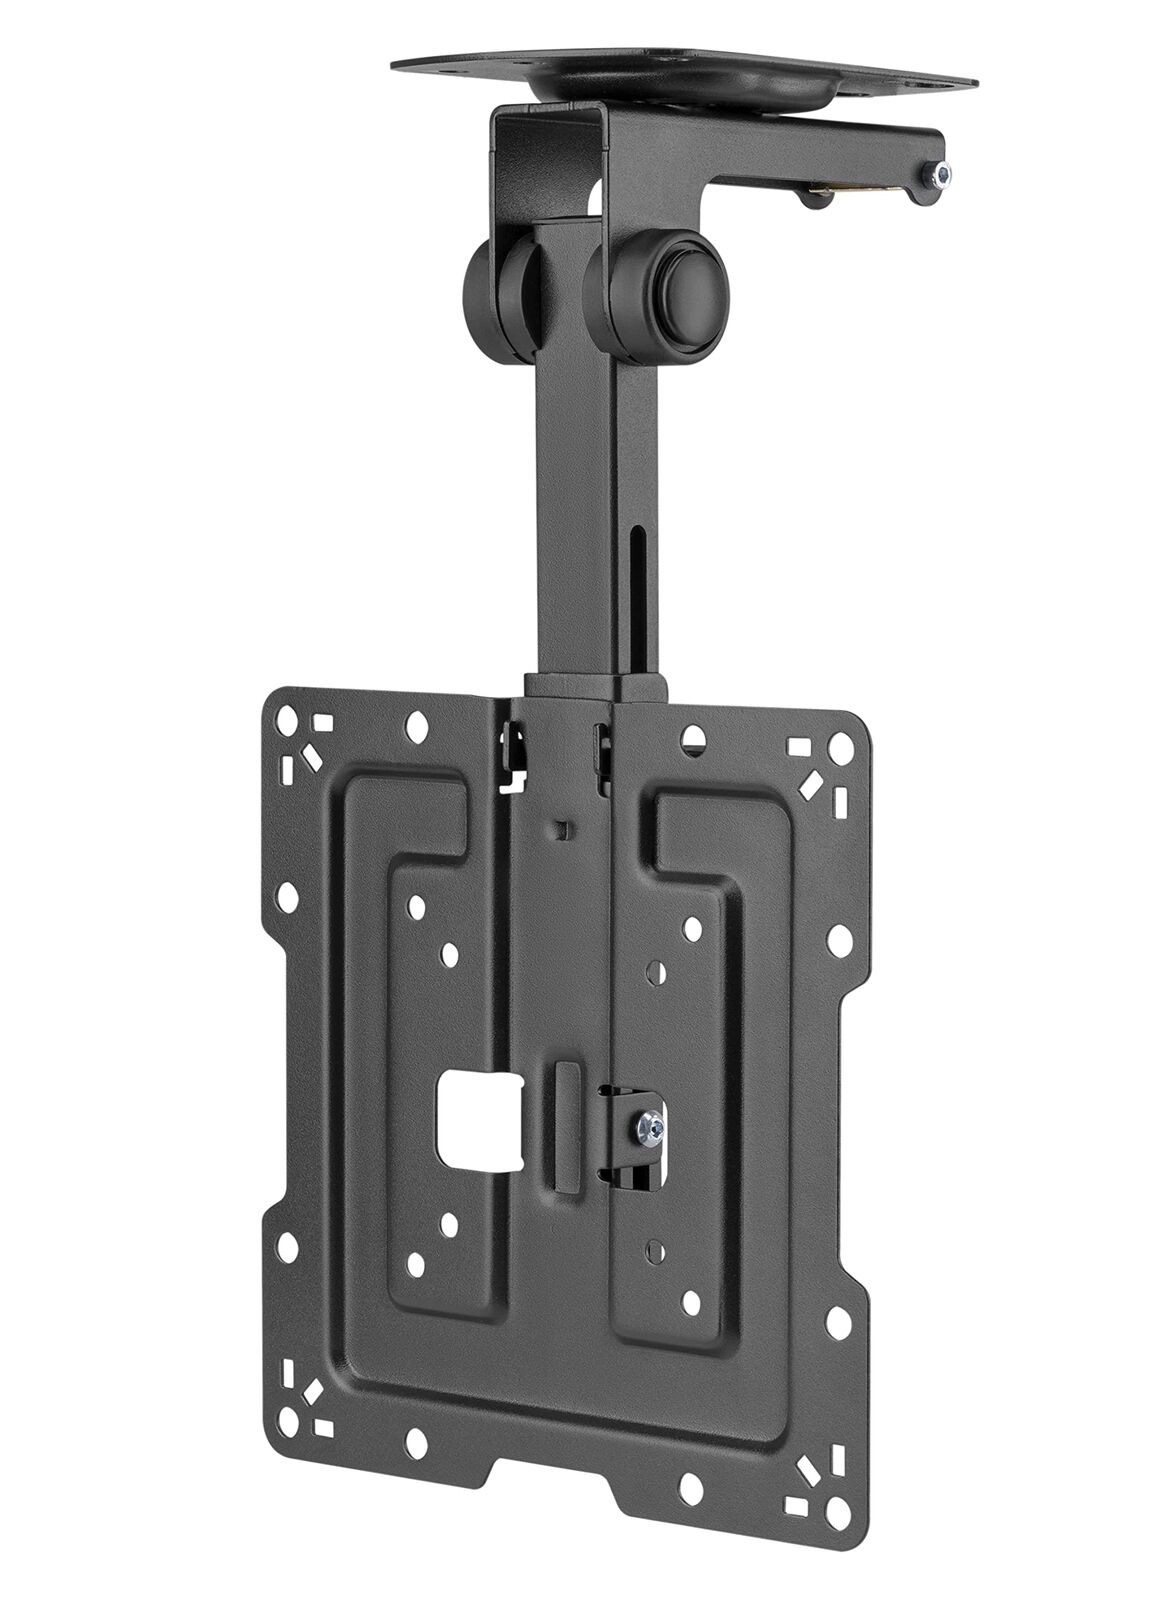 CM322 Flip down TV and Monitor Roof Ceiling Mount | Fits Flat Screen 19 to 42 In